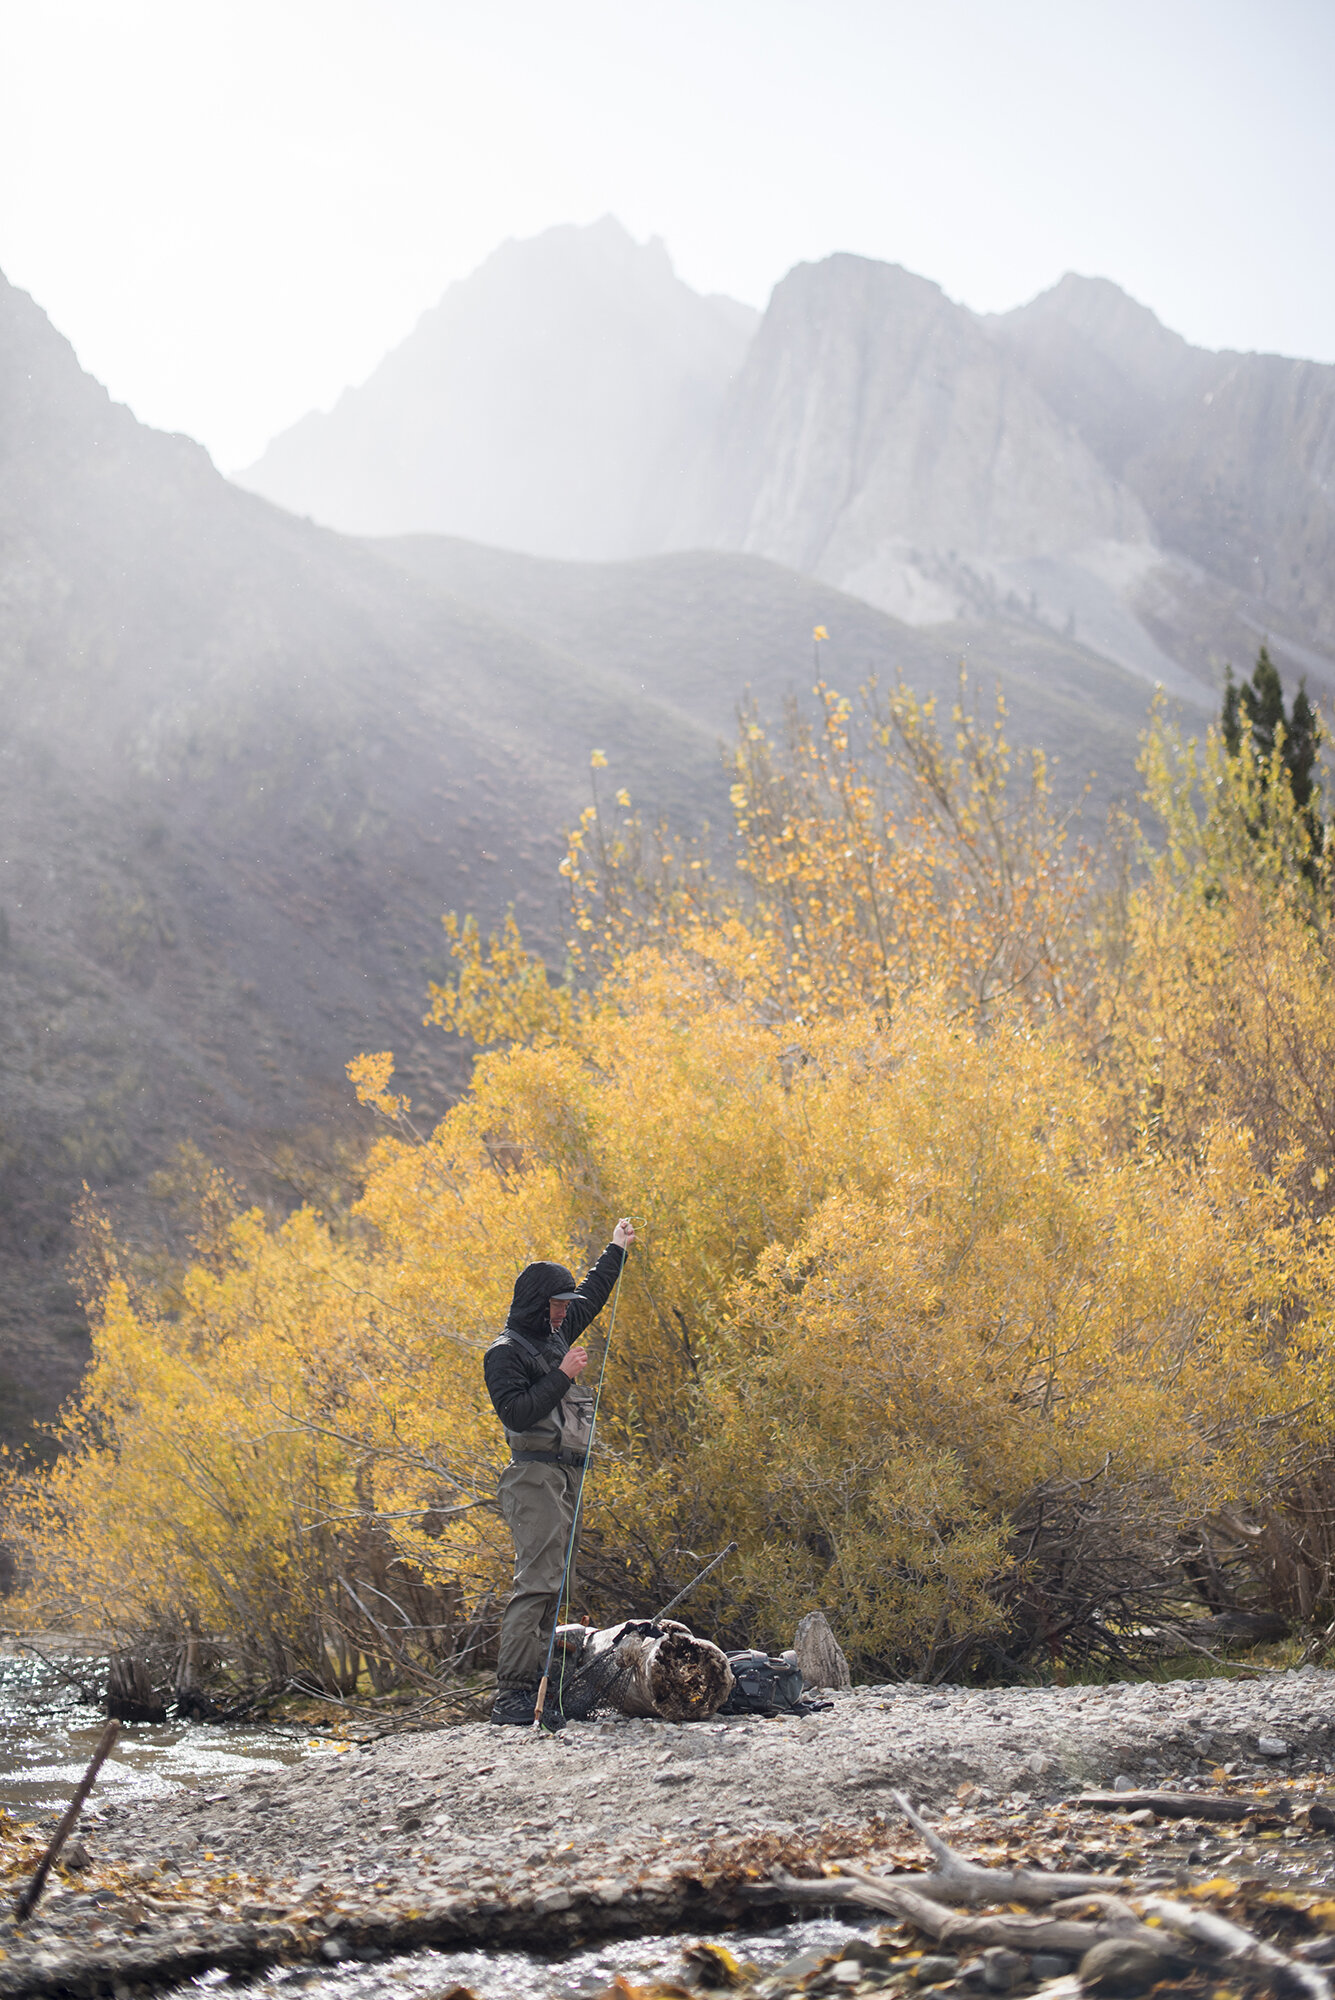  A fly fisherman prepares his gear in front of fall colors and a mountain backdrop.  